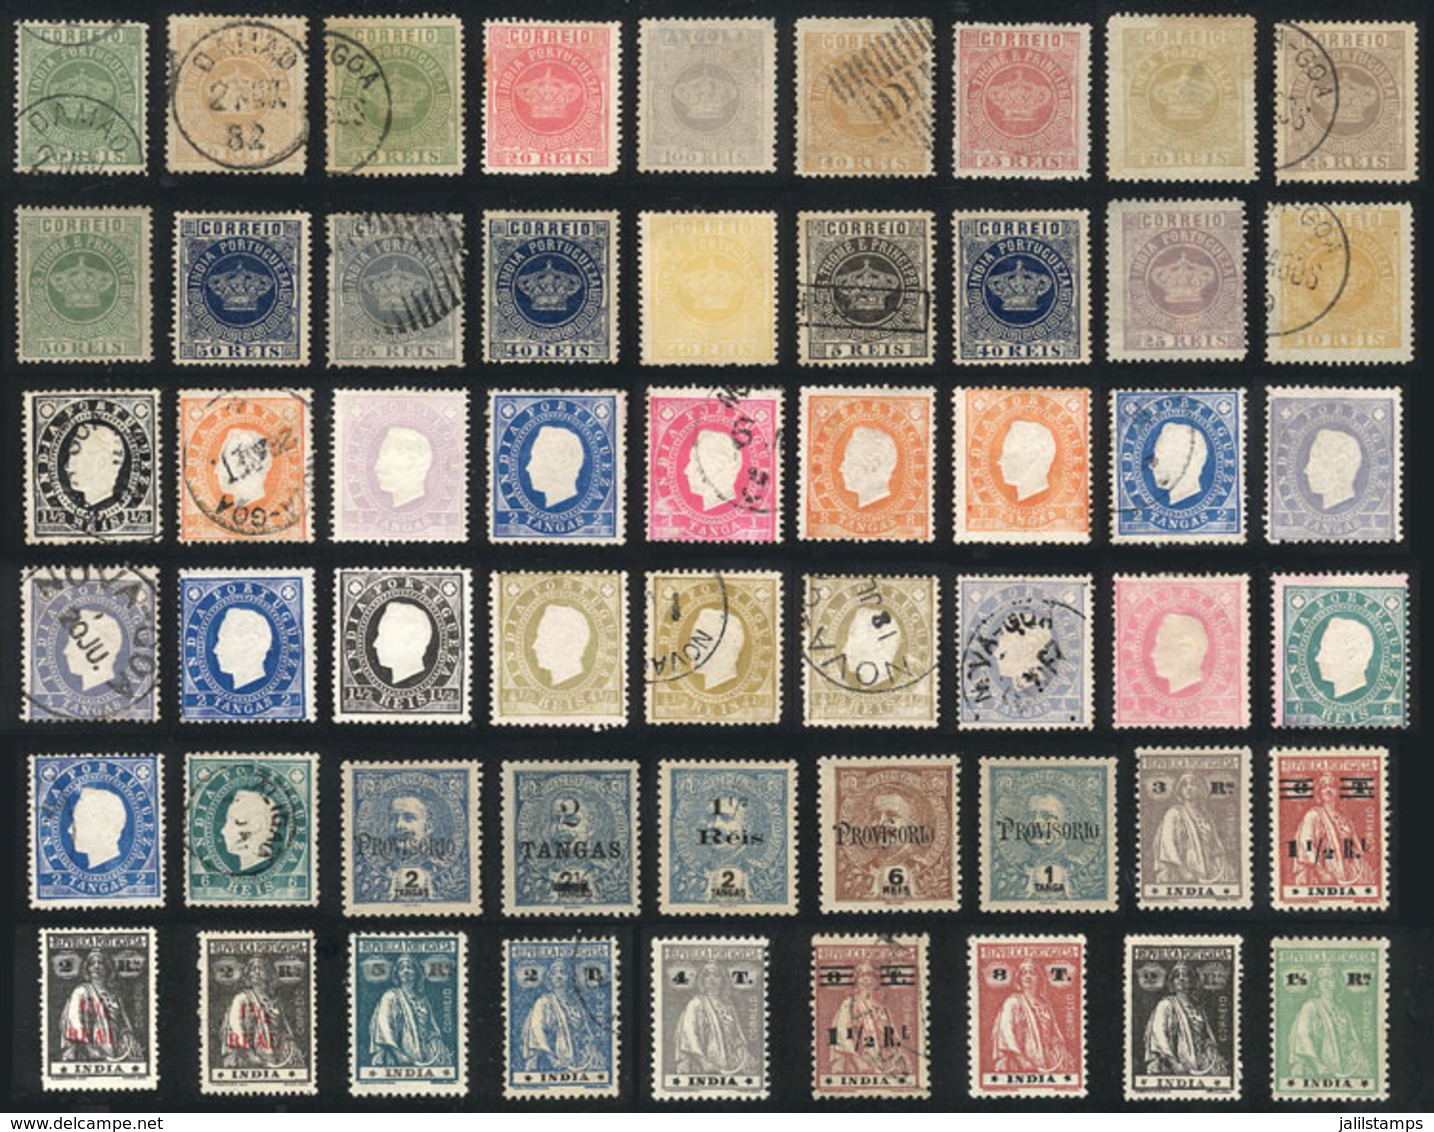 1431 PORTUGUESE INDIA: Interesting Lot Of Old Stamps, Fine General Quality, Scott Catalog Value Is Over US$500, Good Opp - Portugiesisch-Indien